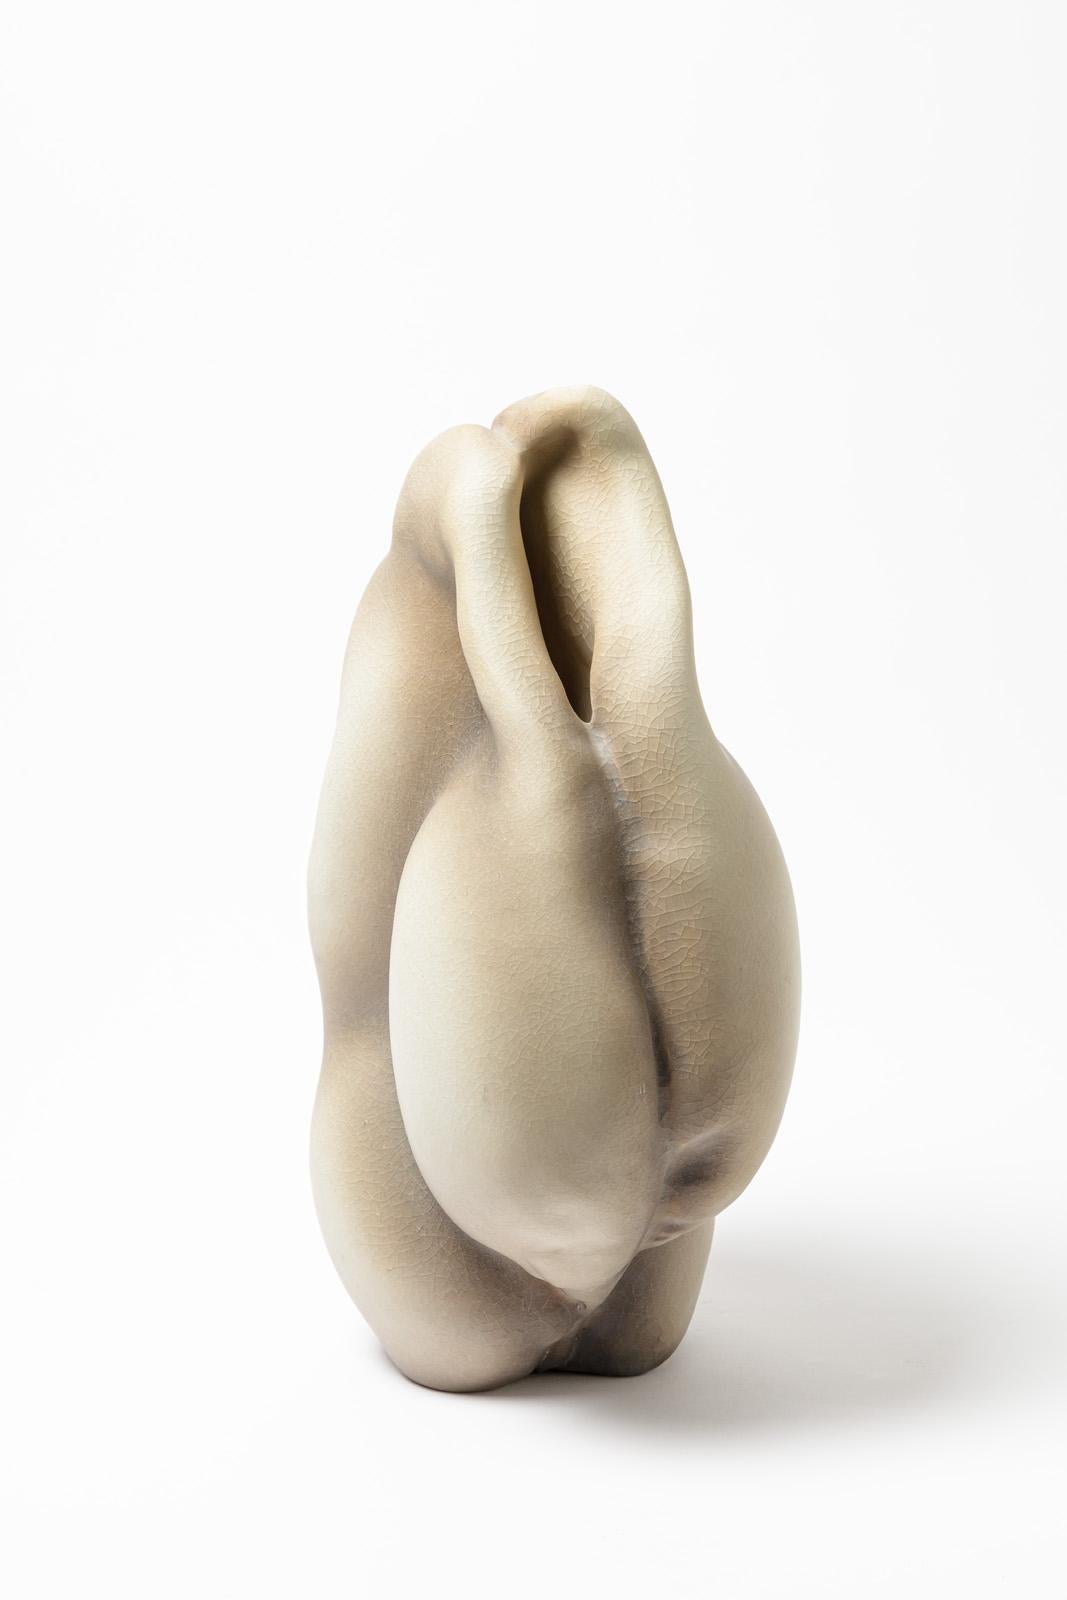 French Porcelain Sculpture by Wayne Fischer, 2007 For Sale